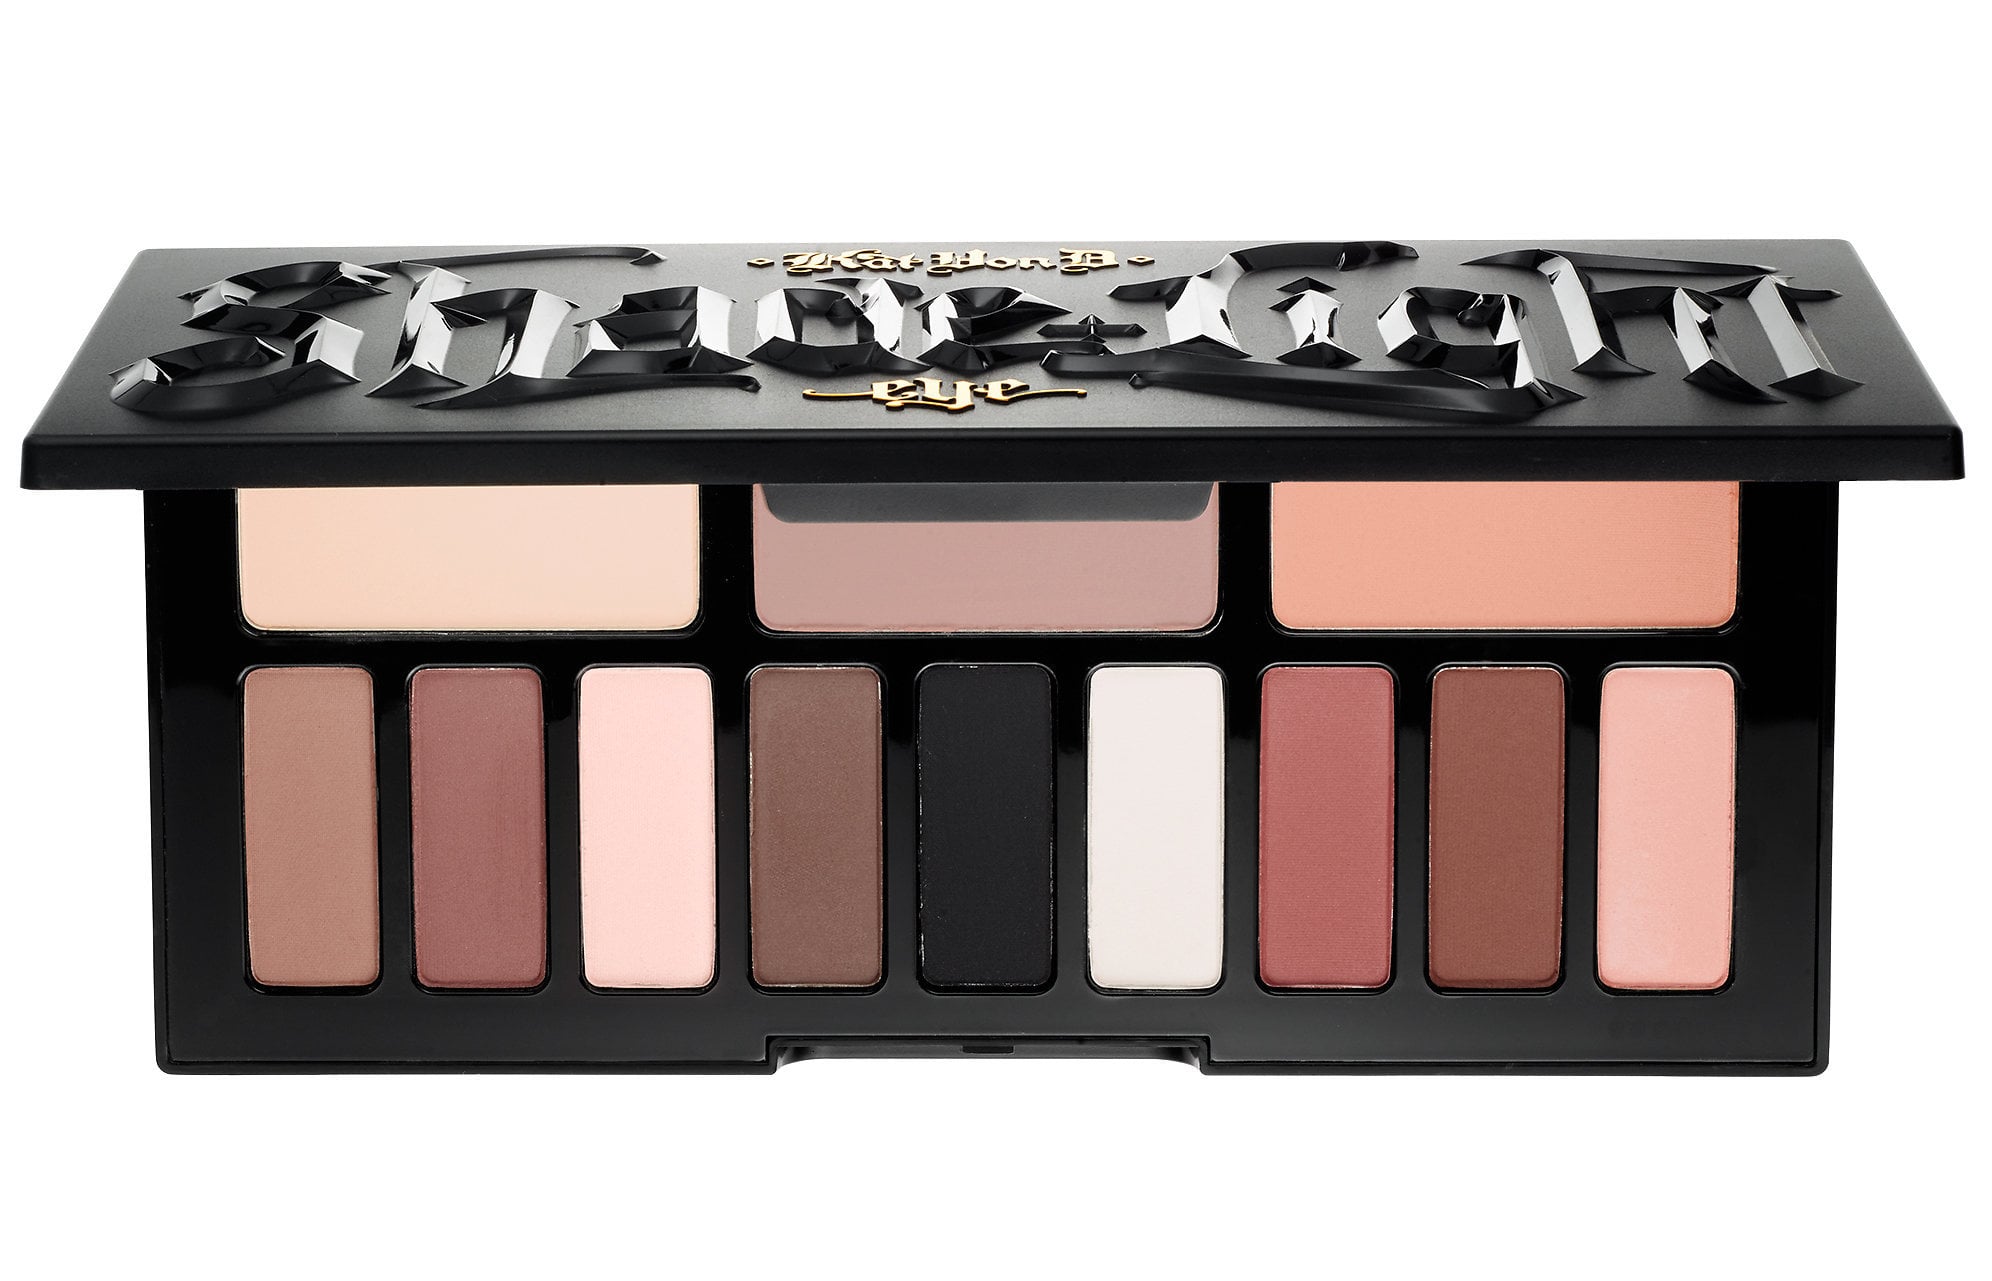 Kat Von D Shade + Light Eye Contour Palette | The 9 Best Shadow Palettes From Sephora Are Obsession-Worthy | POPSUGAR Photo